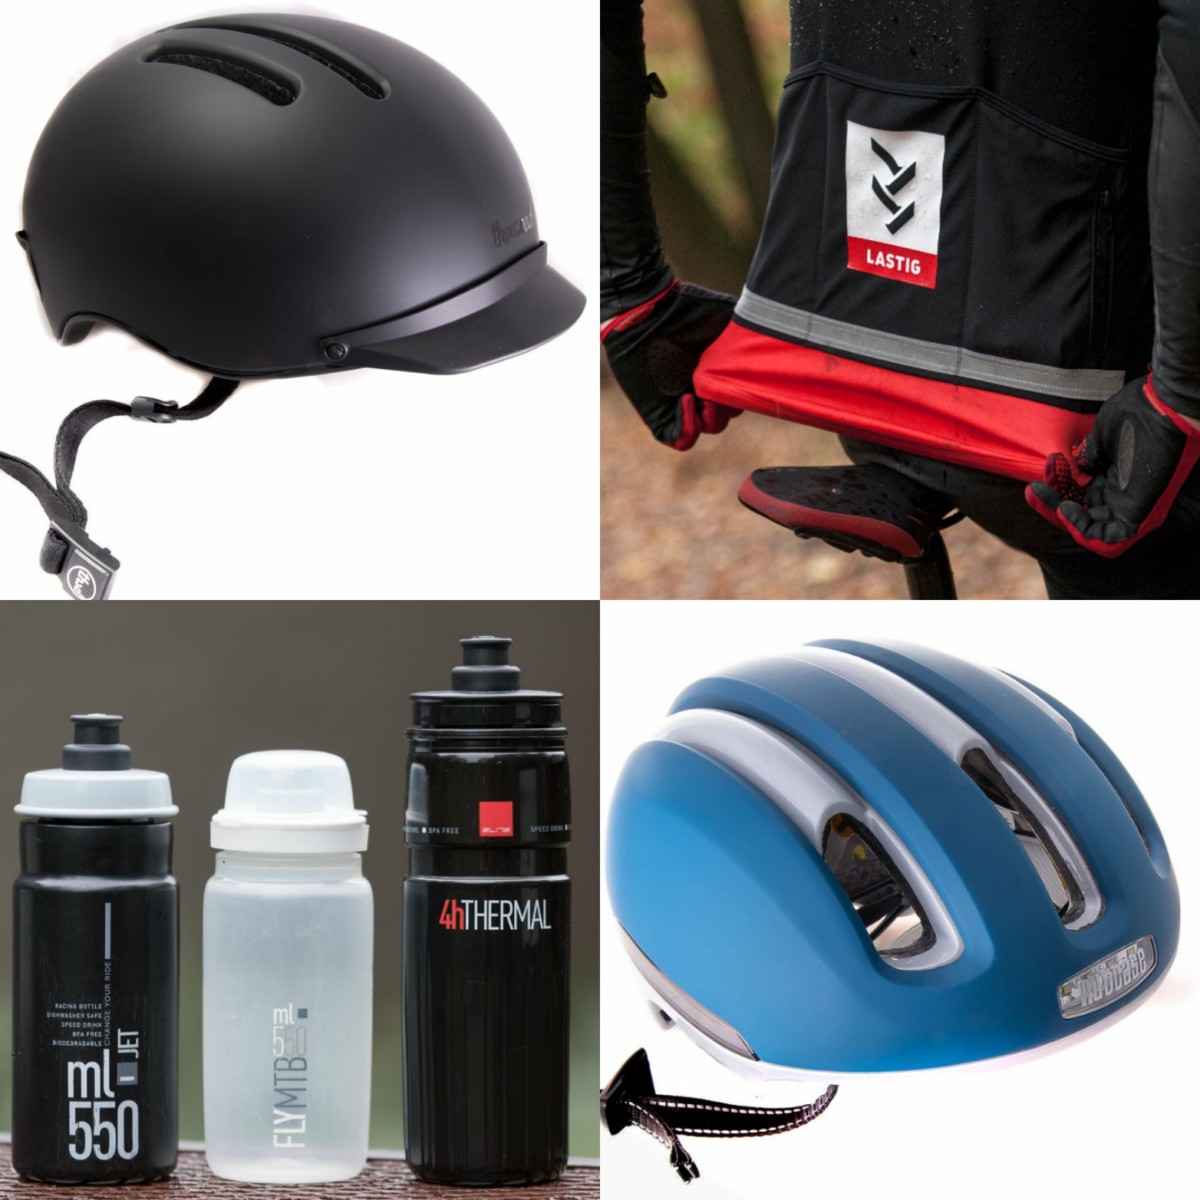 2020 Gift Ideas for the cyclist in your life